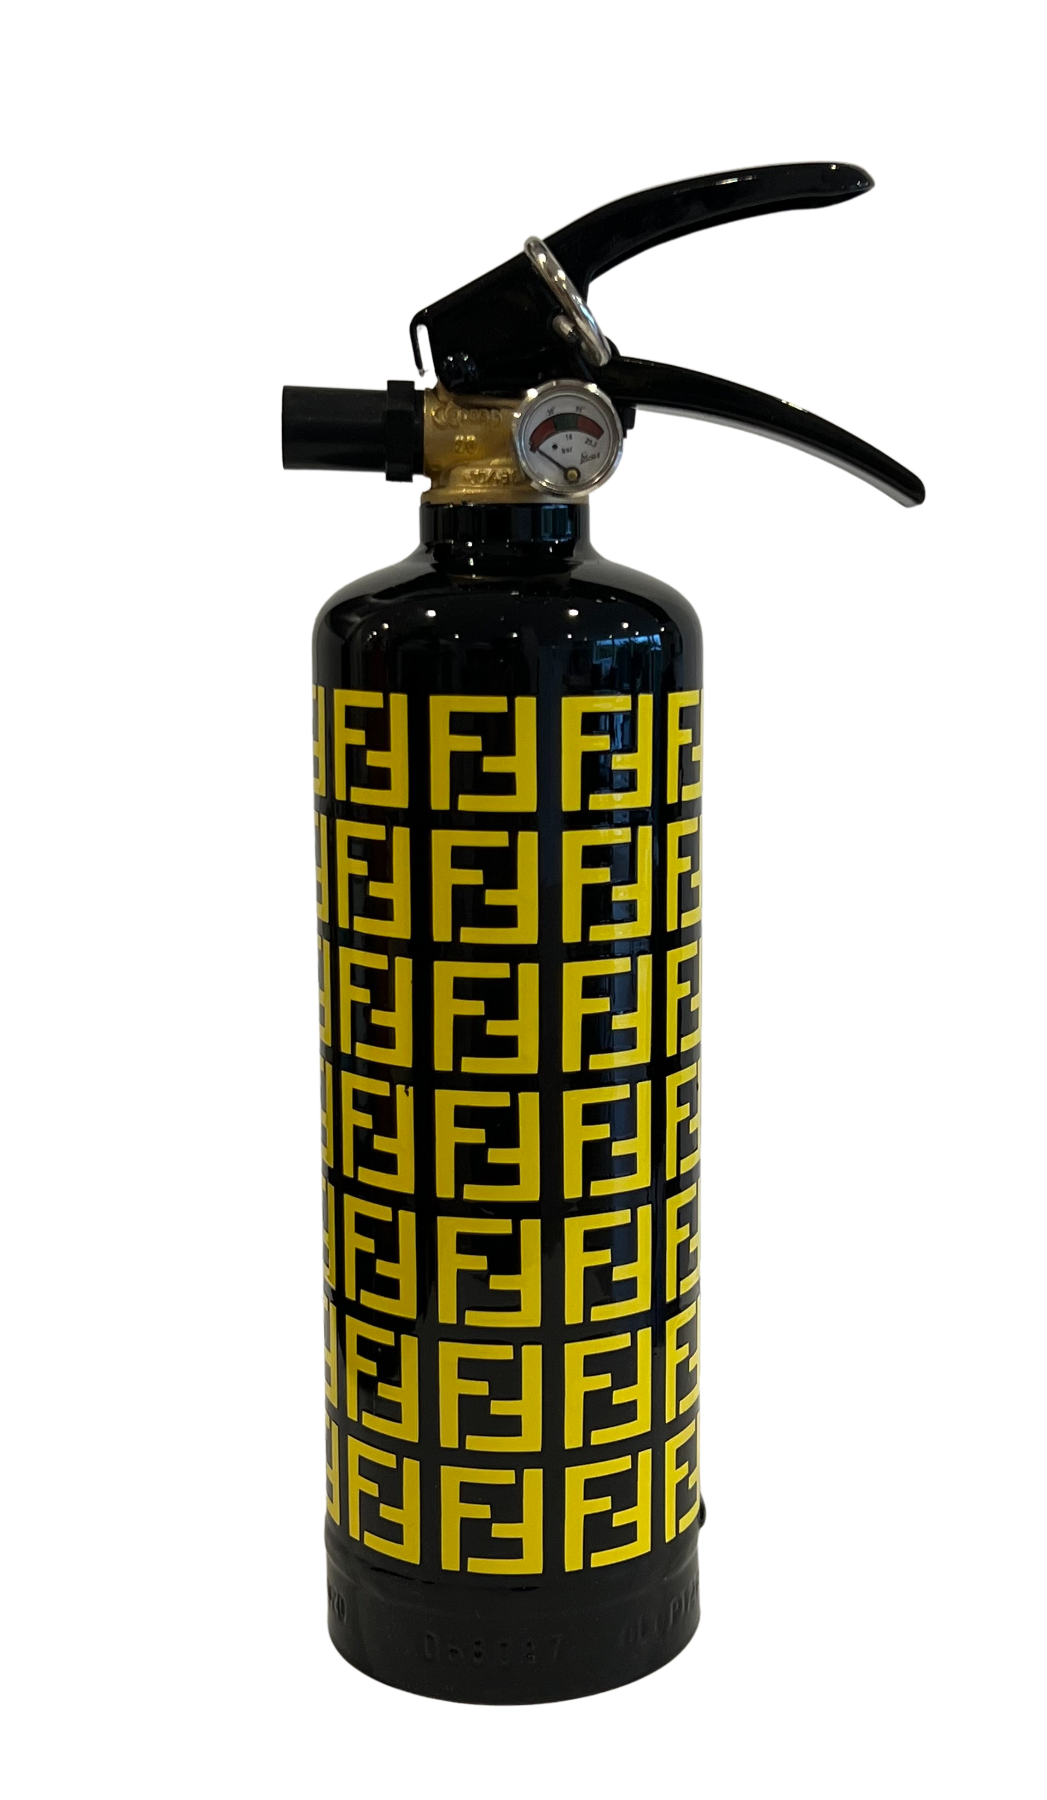 Fire Extinguisher by Remy Aillaud